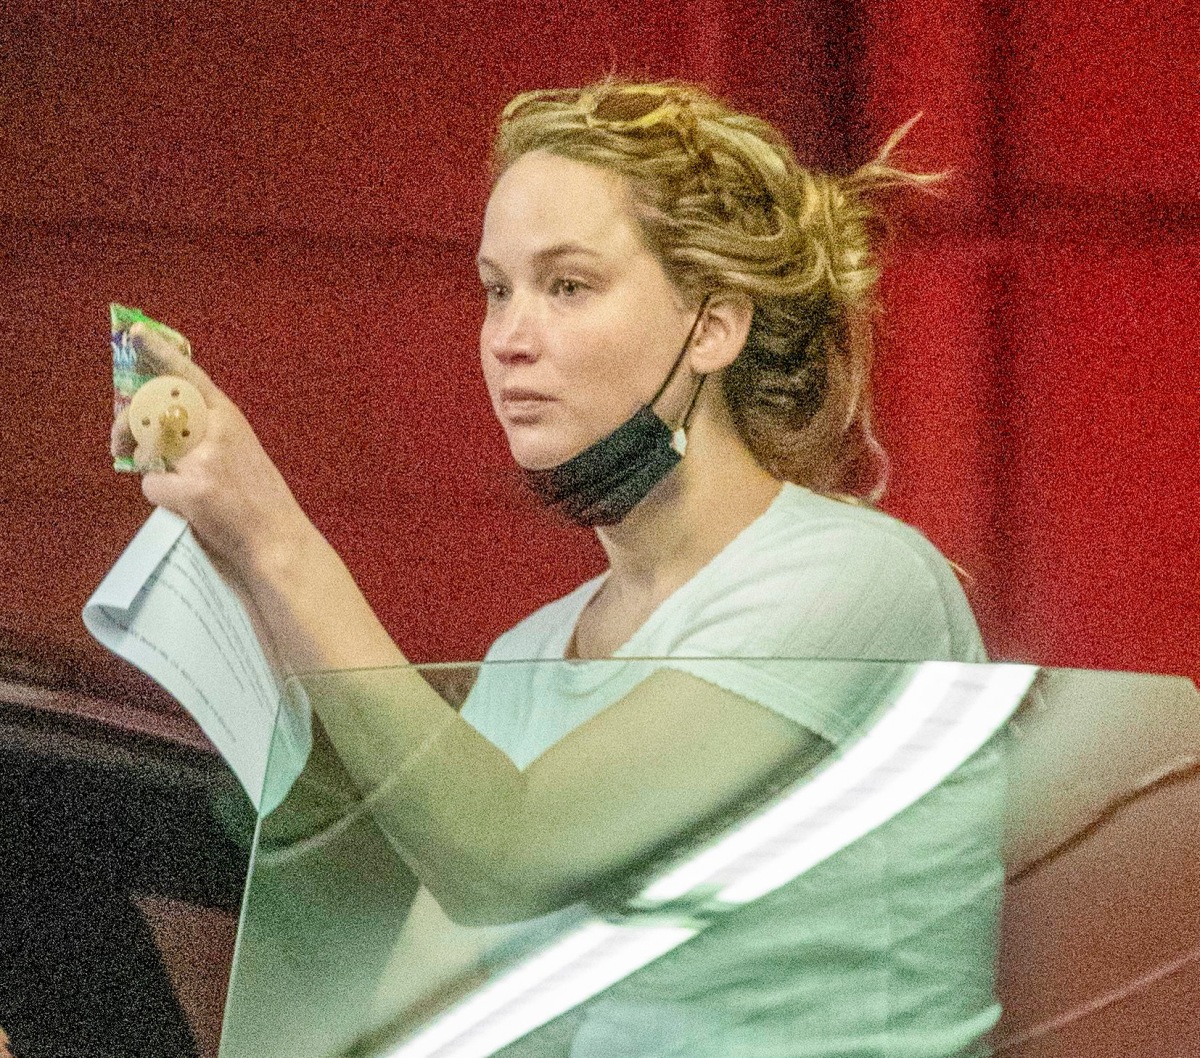 New Mama Jennifer Lawrence Heads Out with Baby on Board